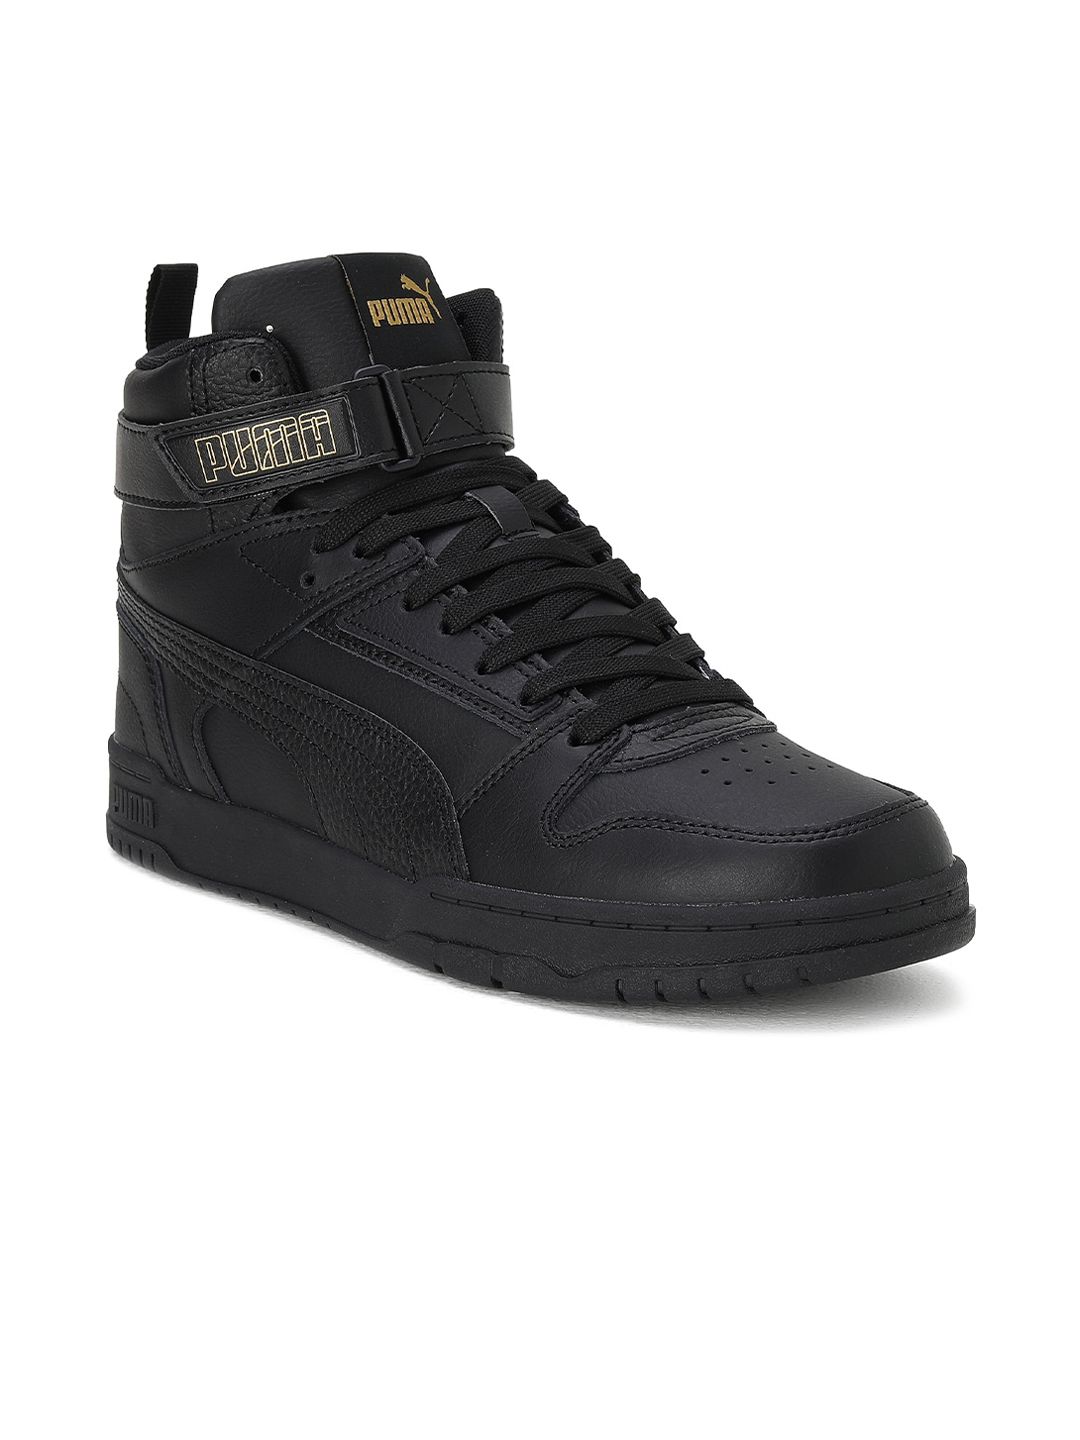 Puma Unisex Black Leather High-Top Sneakers Price in India